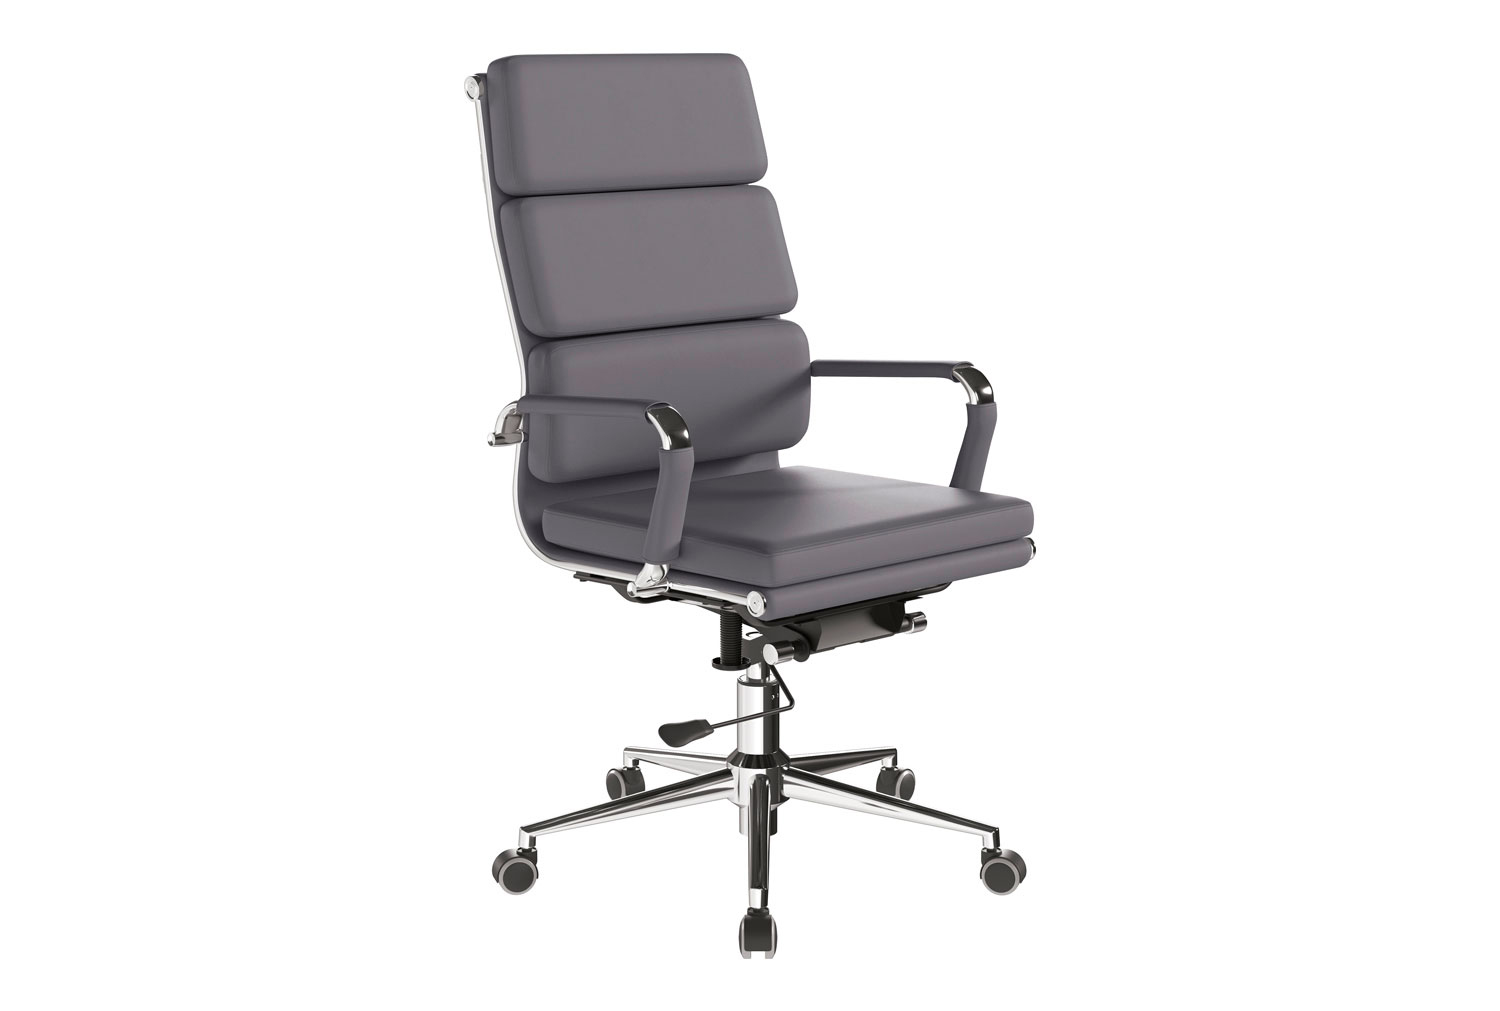 Farrell Bonded Leather Executive Chair (Grey)